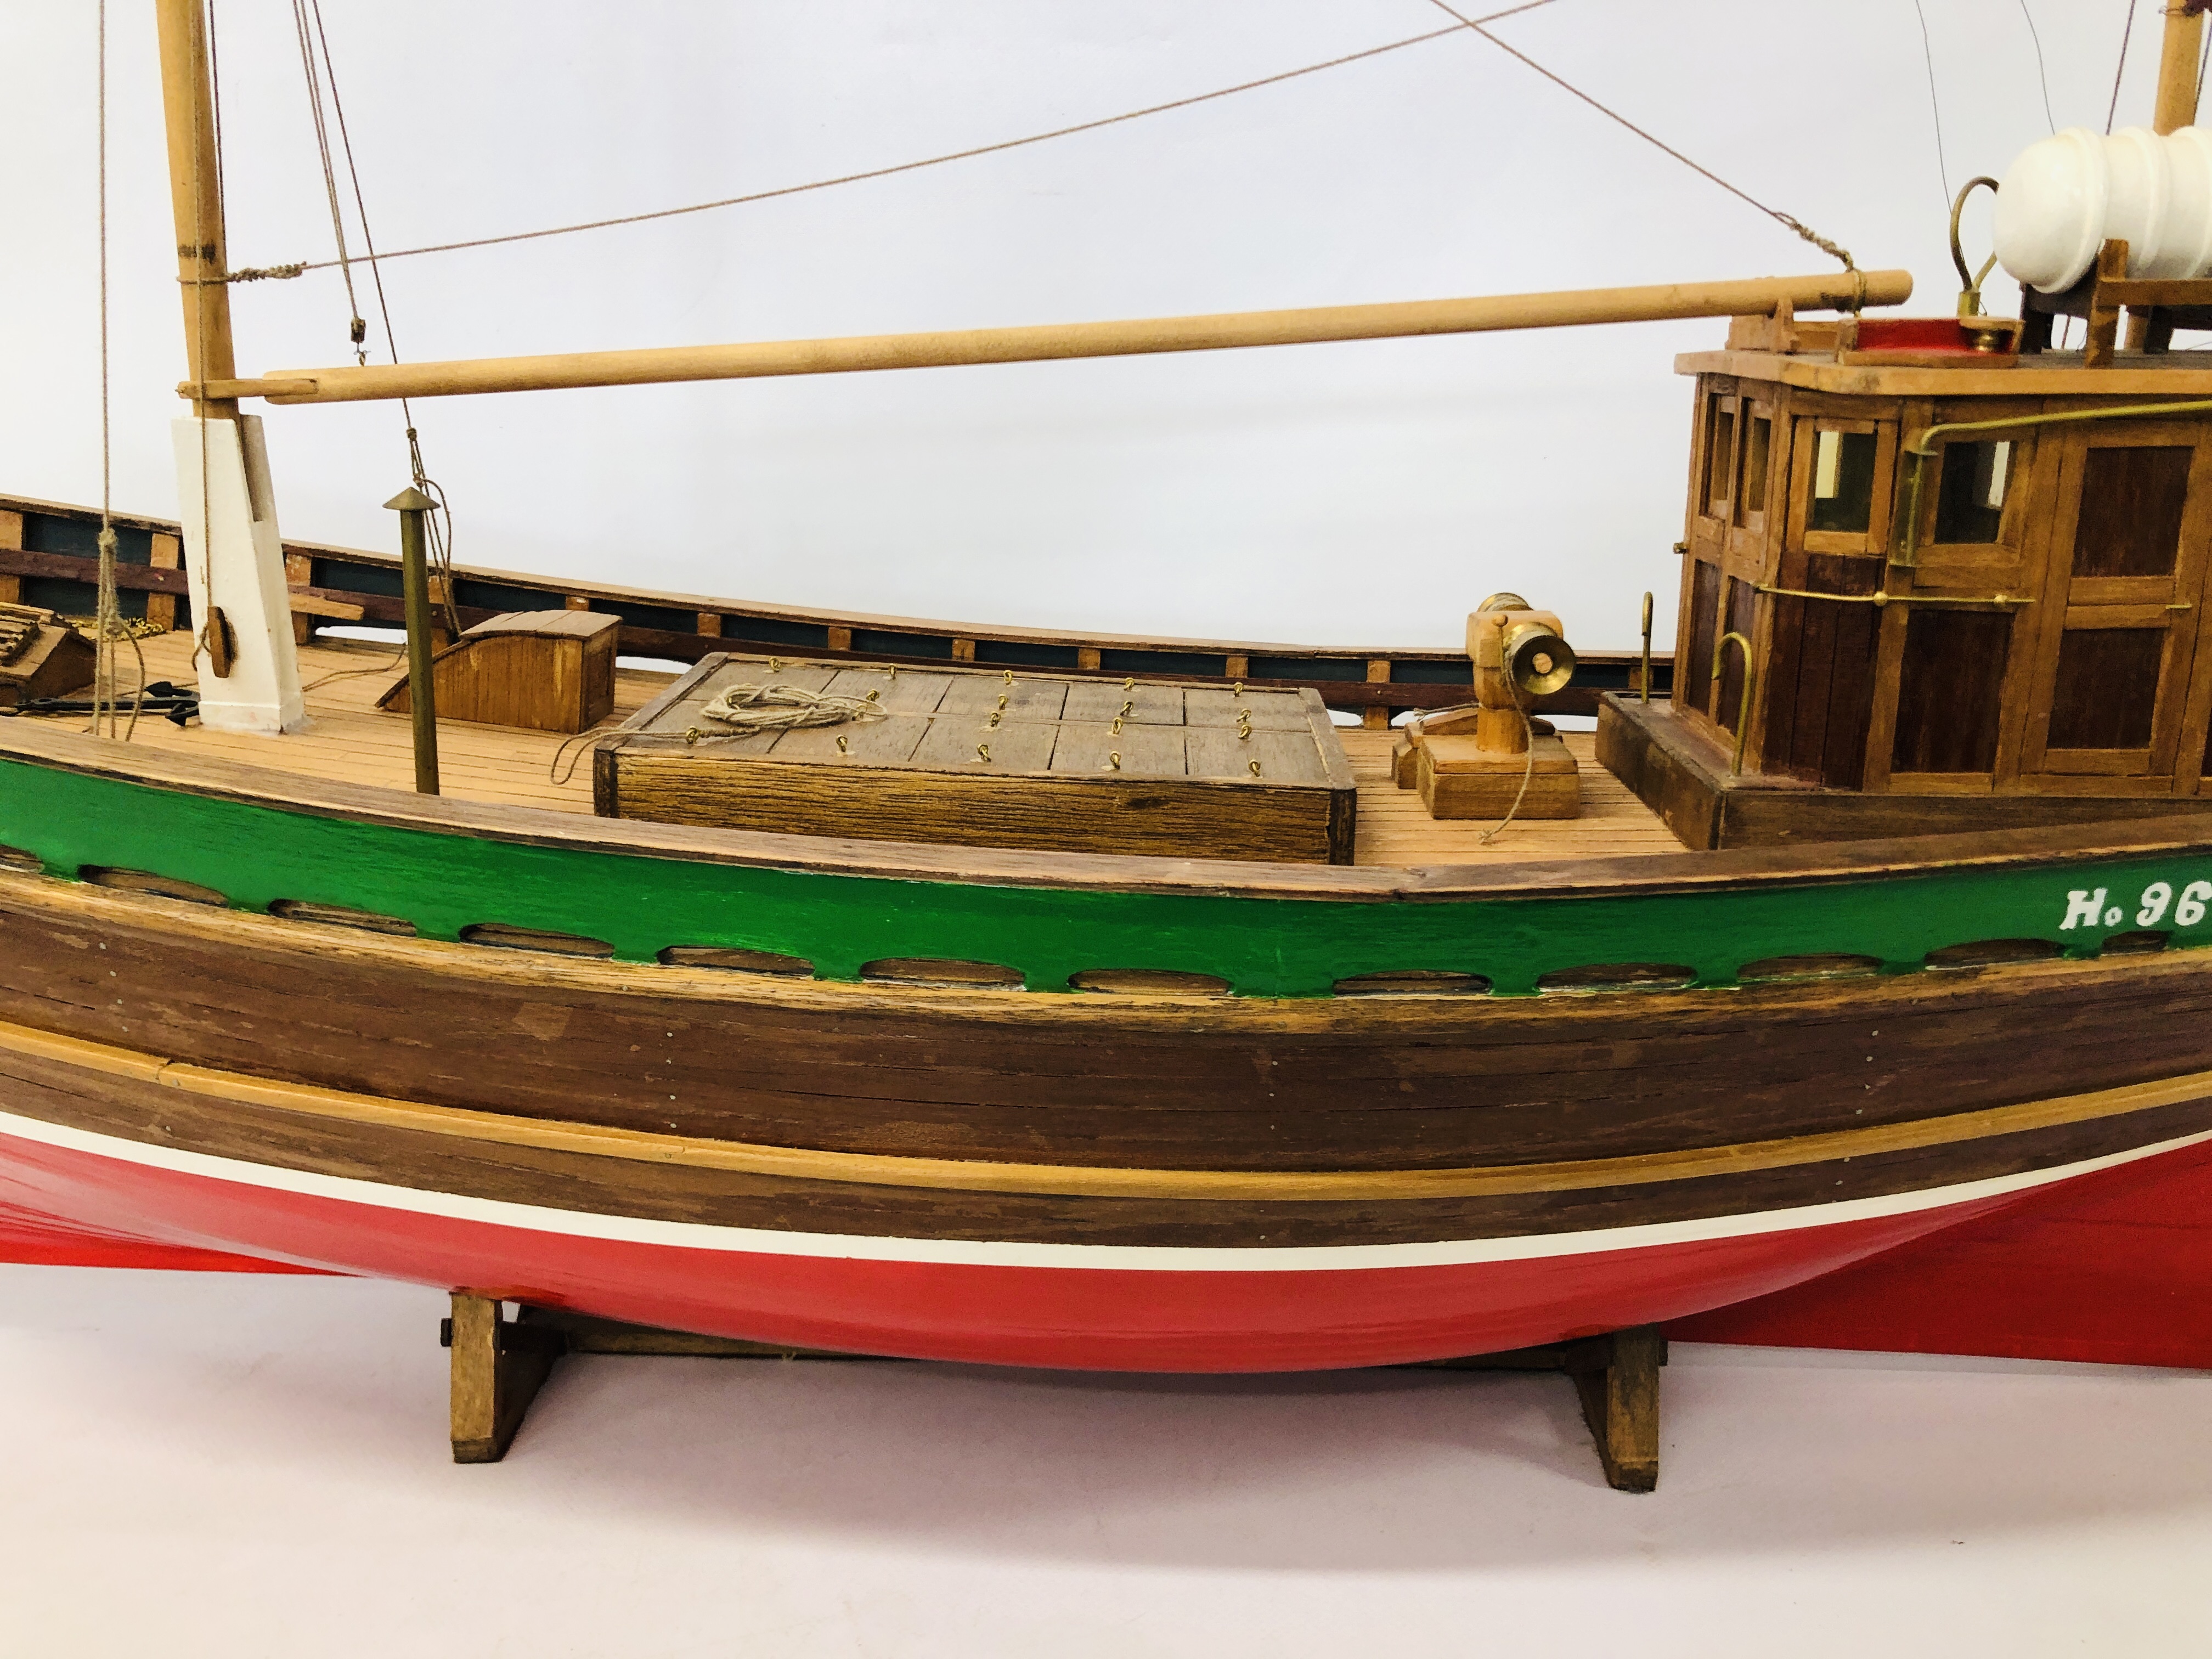 A VINTAGE HAND BUILT WOODEN MODEL OF A FISHING TRAWLER "EILEEN" NO. 96 LENGTH 85CM. HEIGHT 66CM. - Image 4 of 11